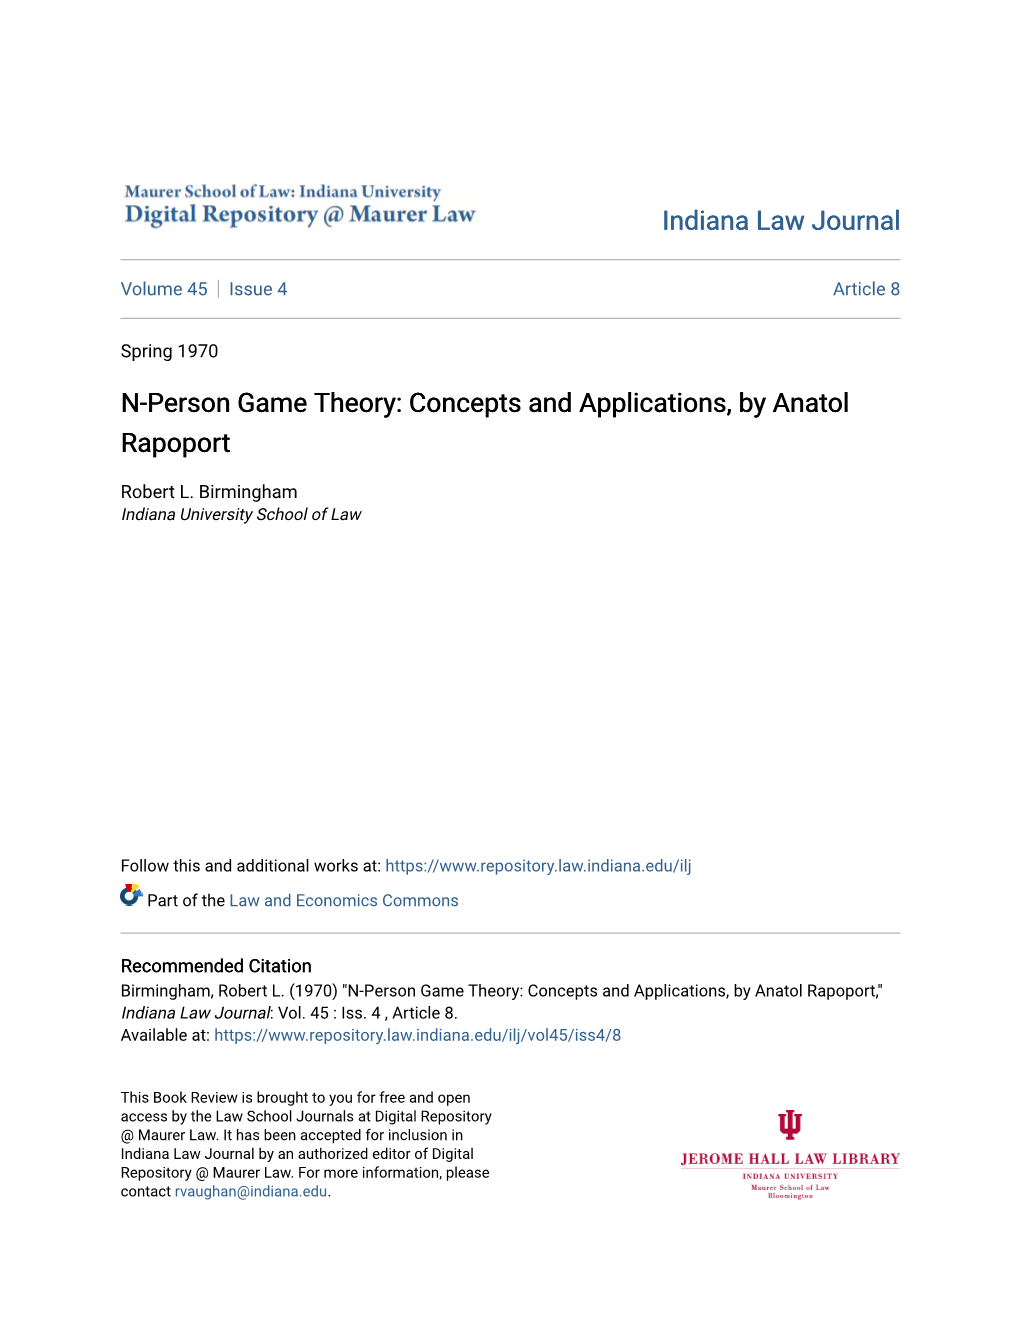 N-Person Game Theory: Concepts and Applications, by Anatol Rapoport